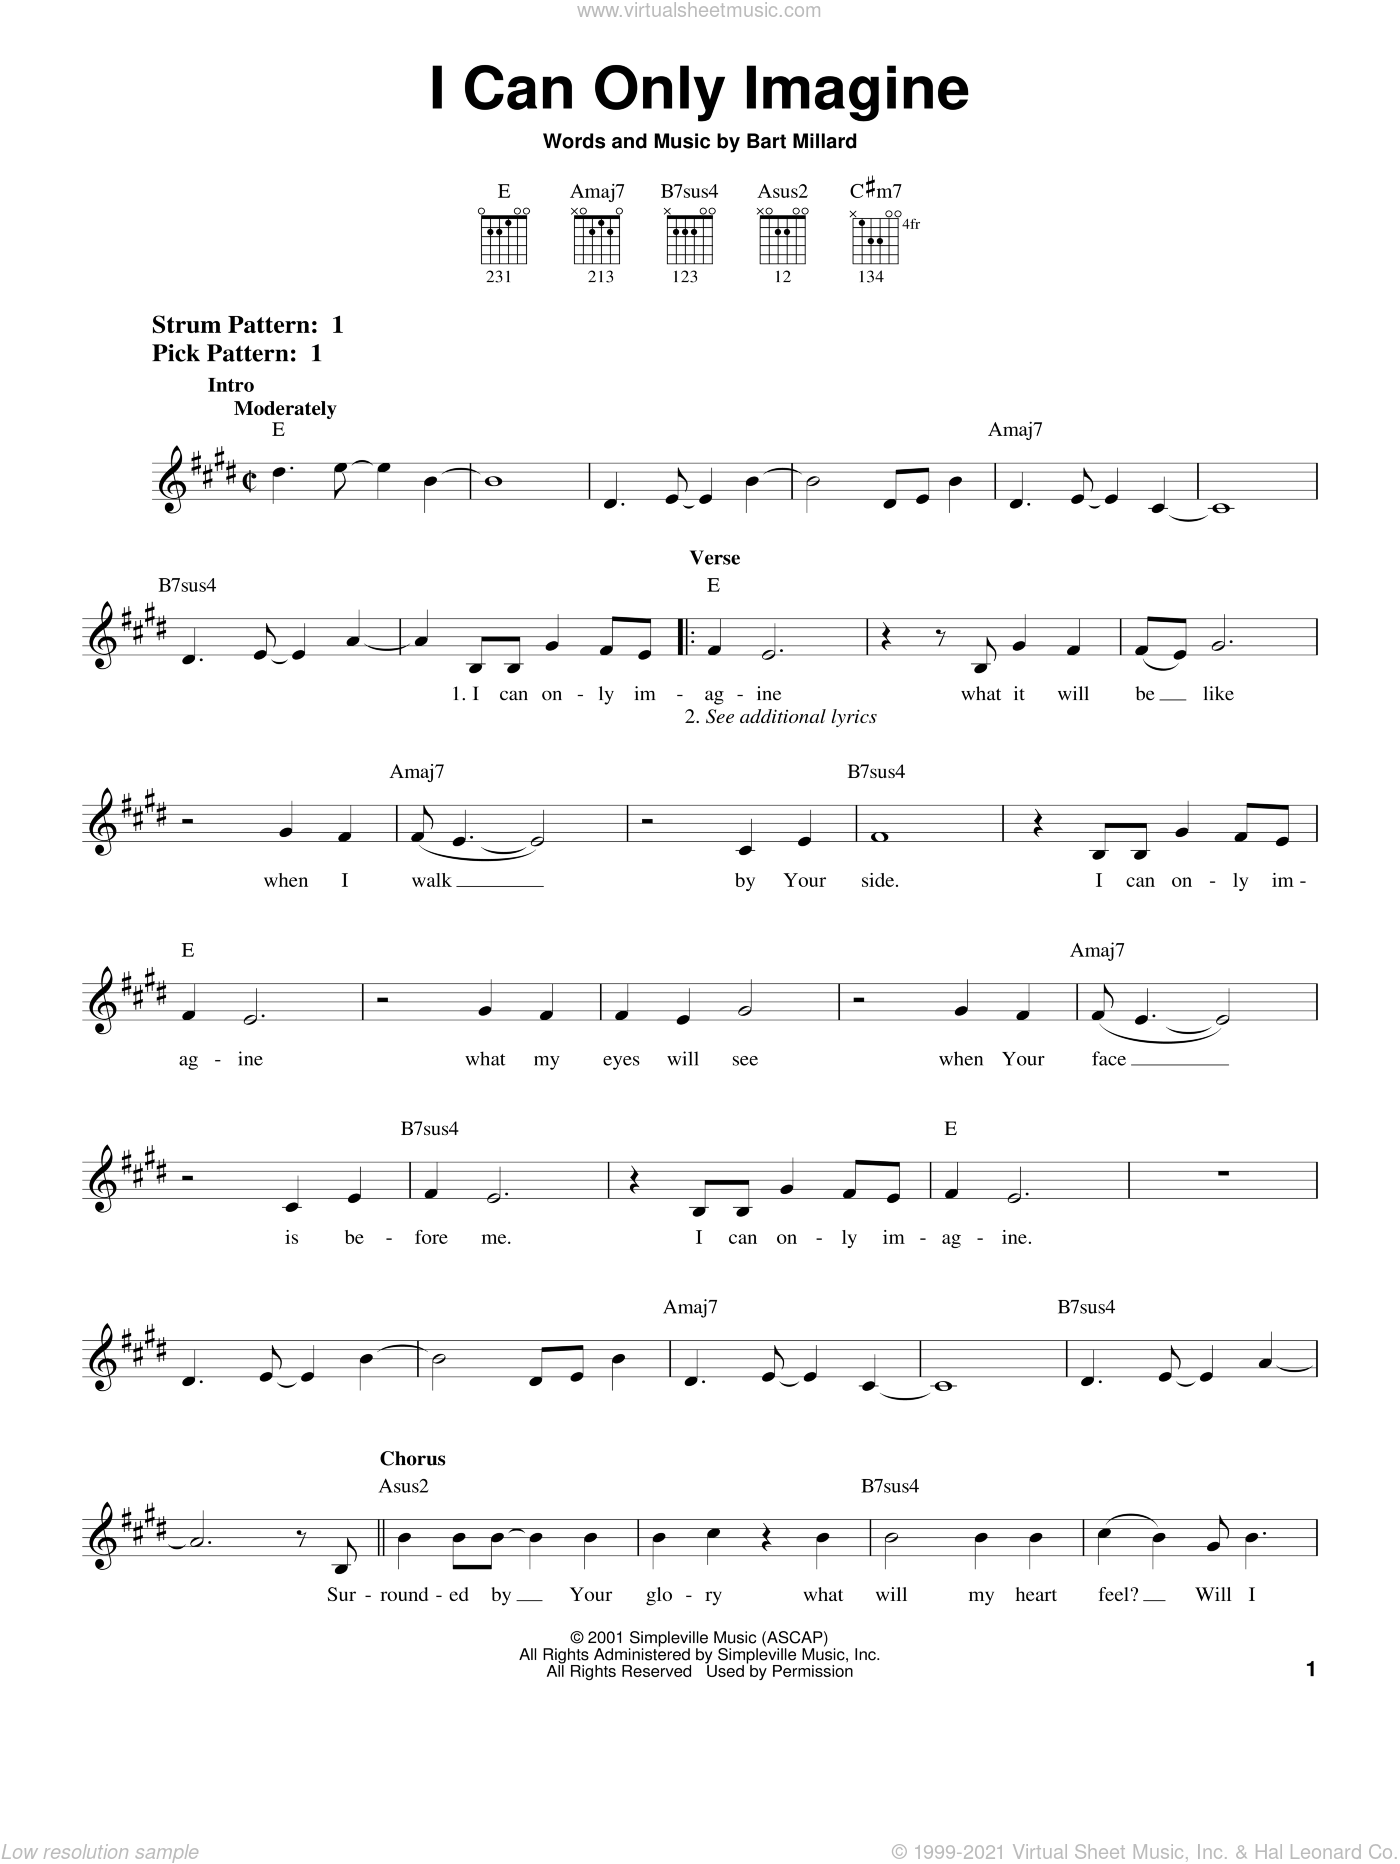 MercyMe - I Can Only Imagine sheet music for guitar solo (chords) v2